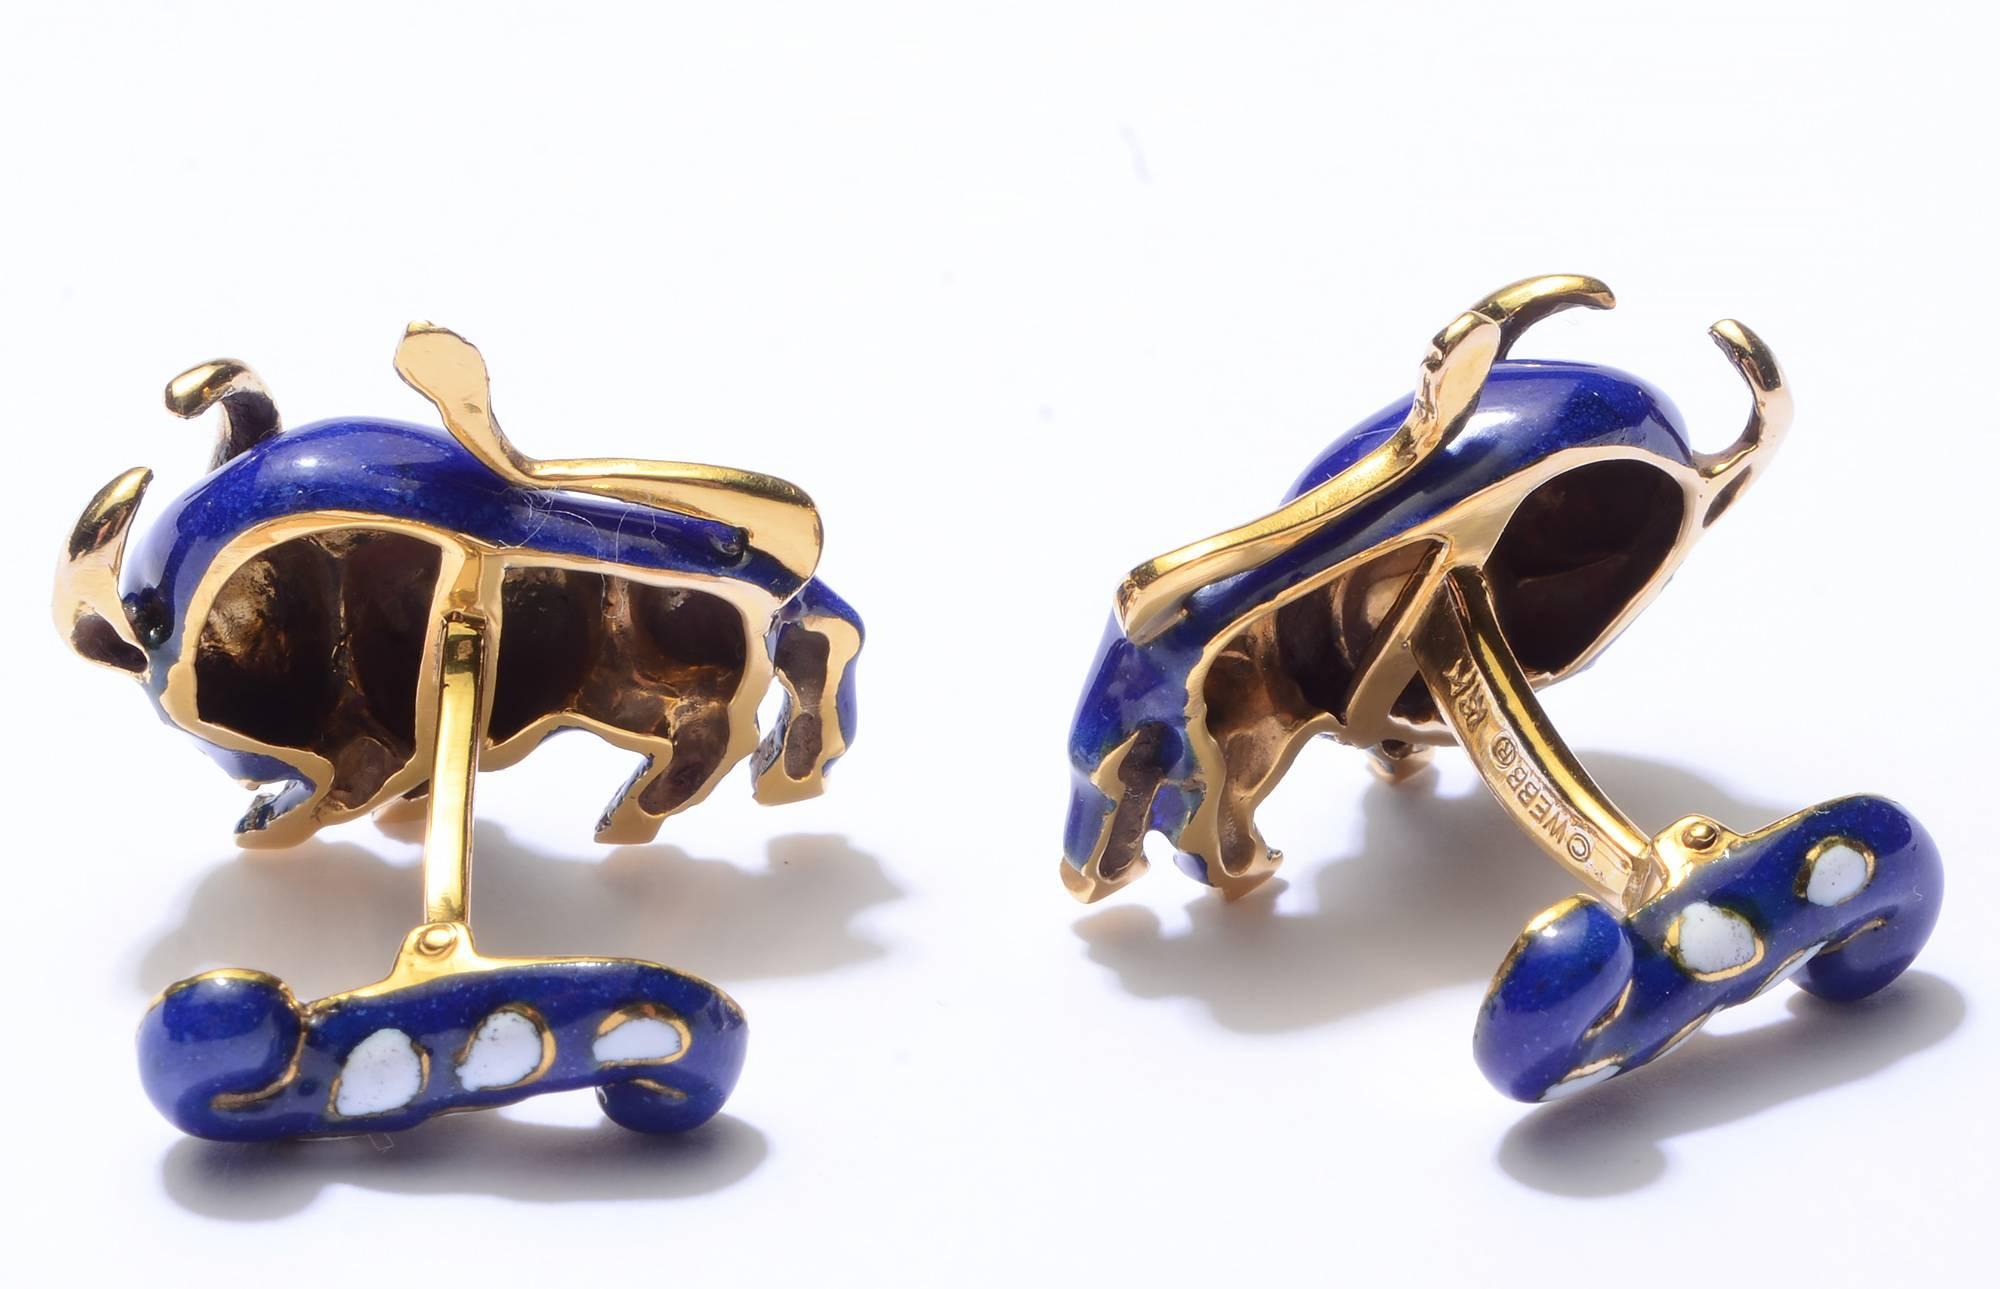 These exceptional Bull cufflinks by David Webb are perfect miniature sculptures. Both the body of the animal as well as the toggle are beautifully decorated.They are a stunning cobalt blue color. Thematically, they are ideal for either the